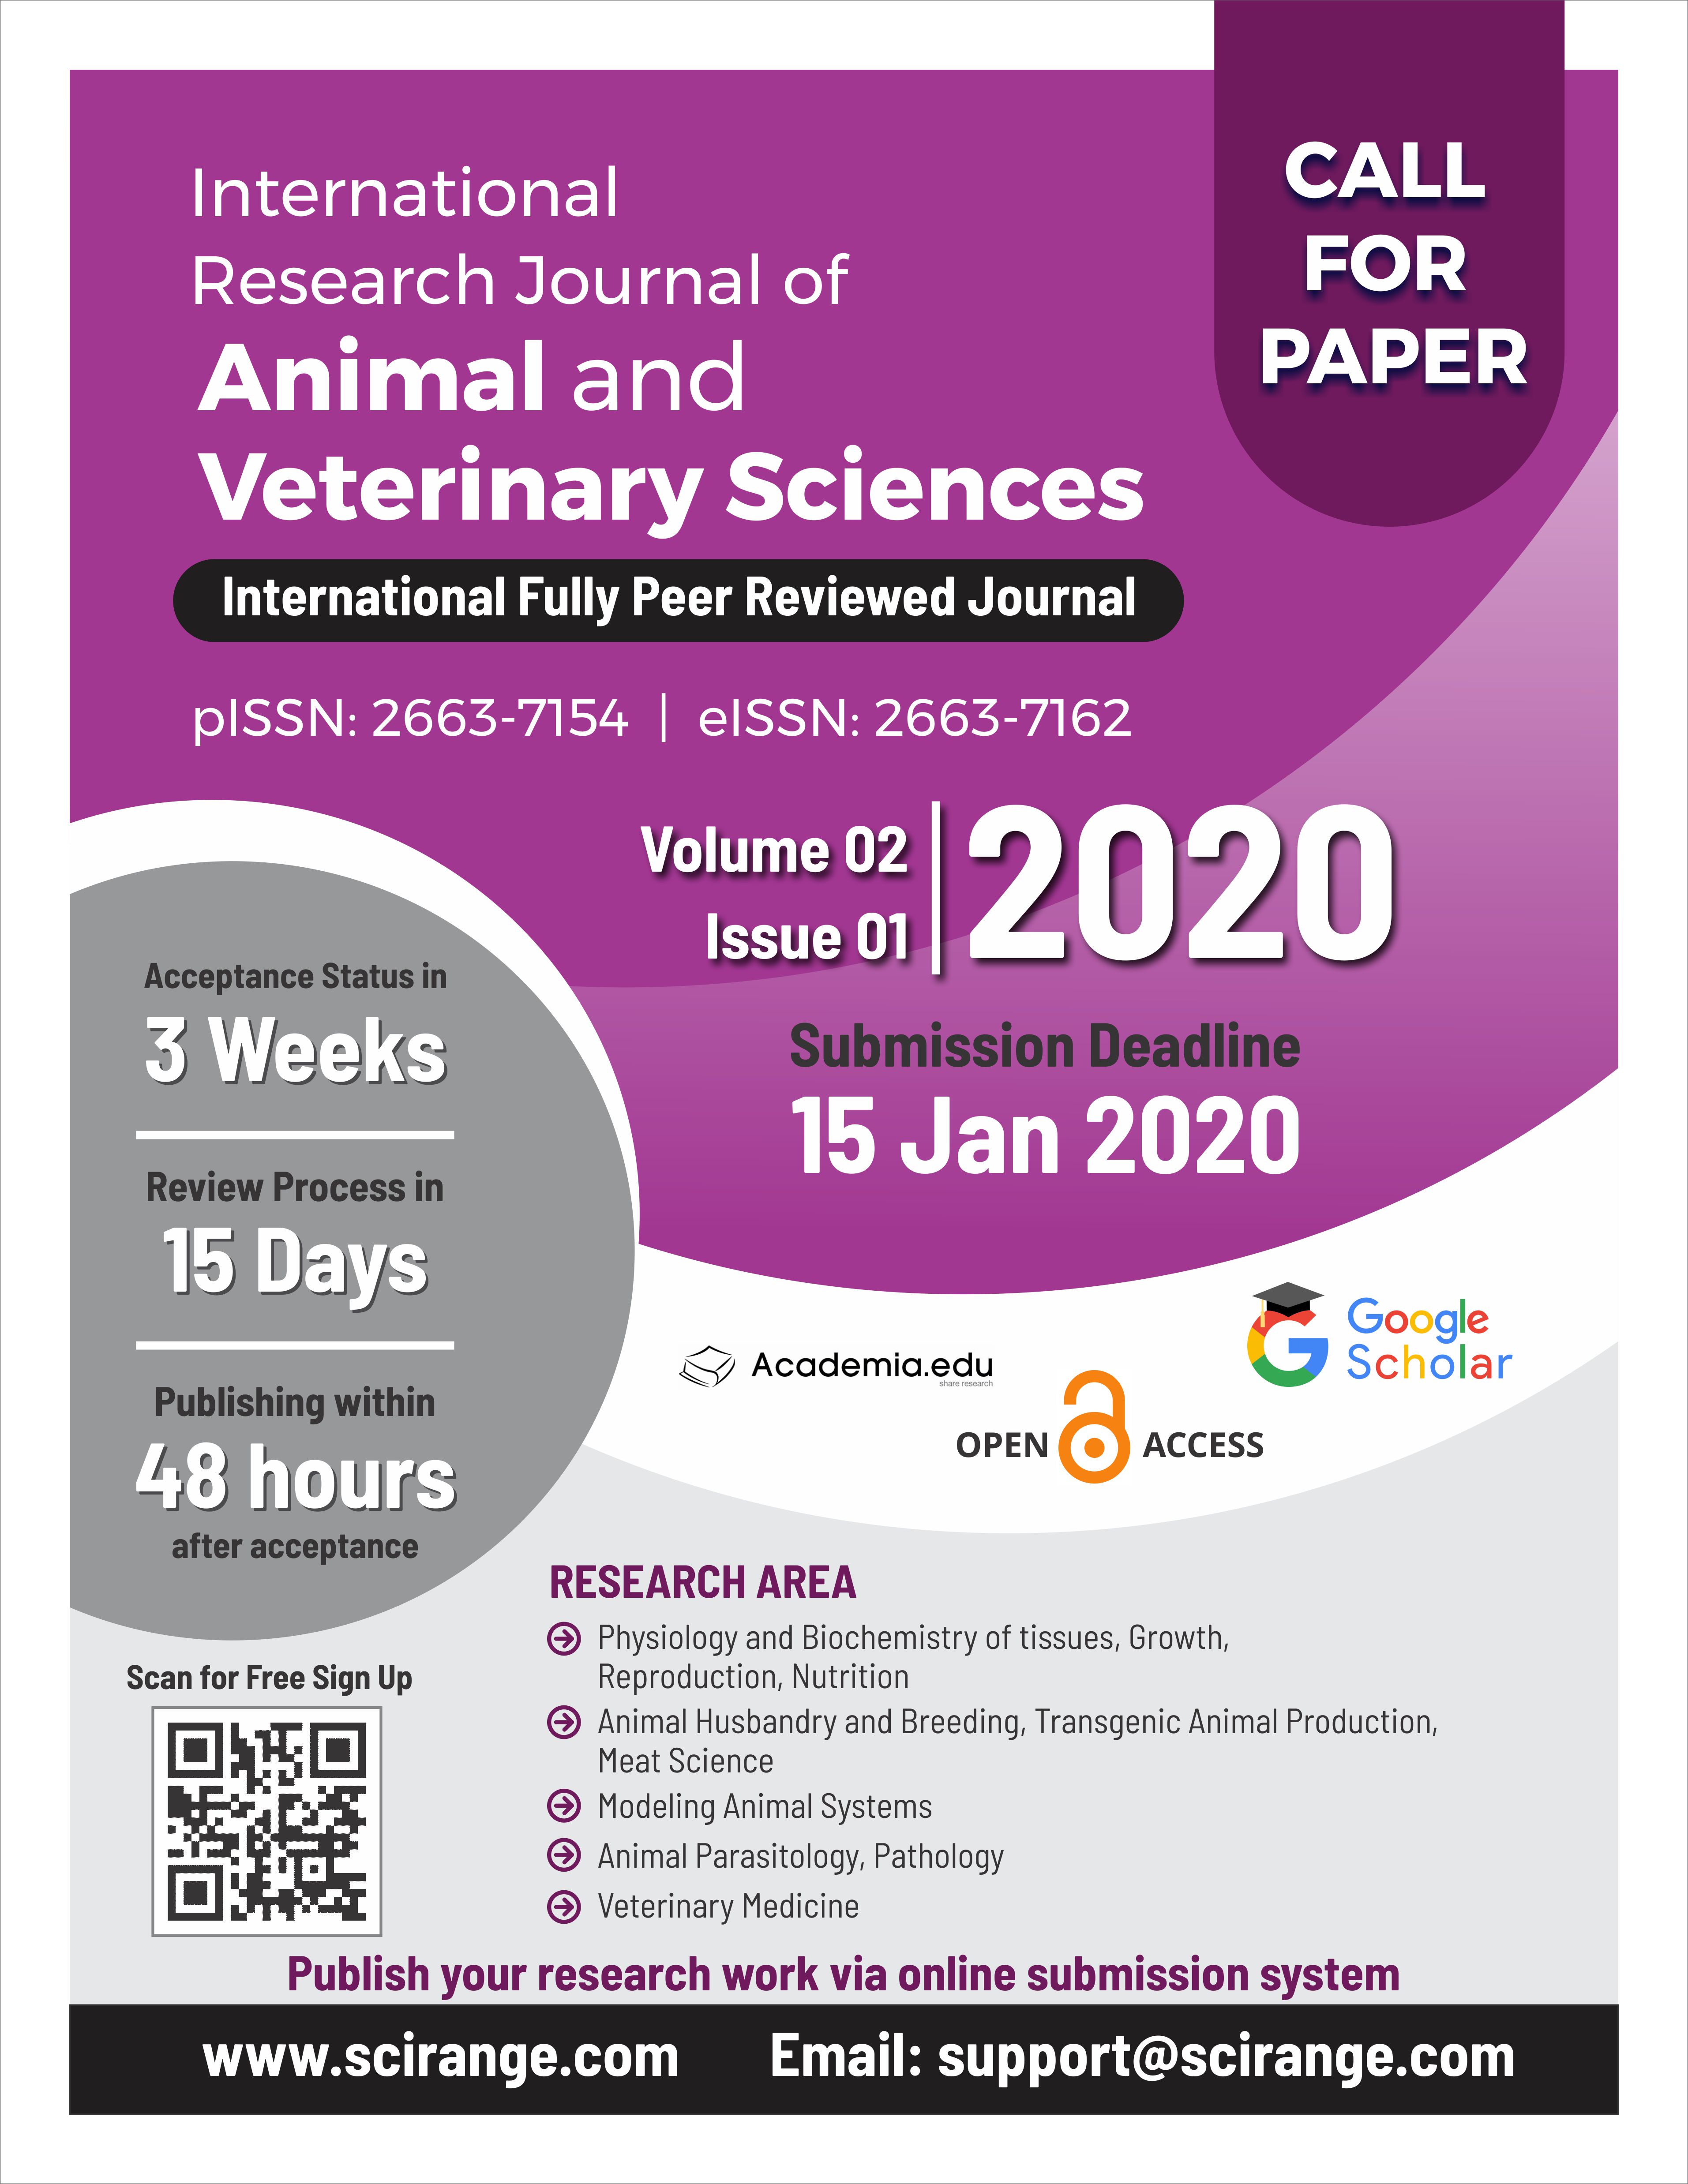 International Research Journal of Animal and Veterinary Sciences